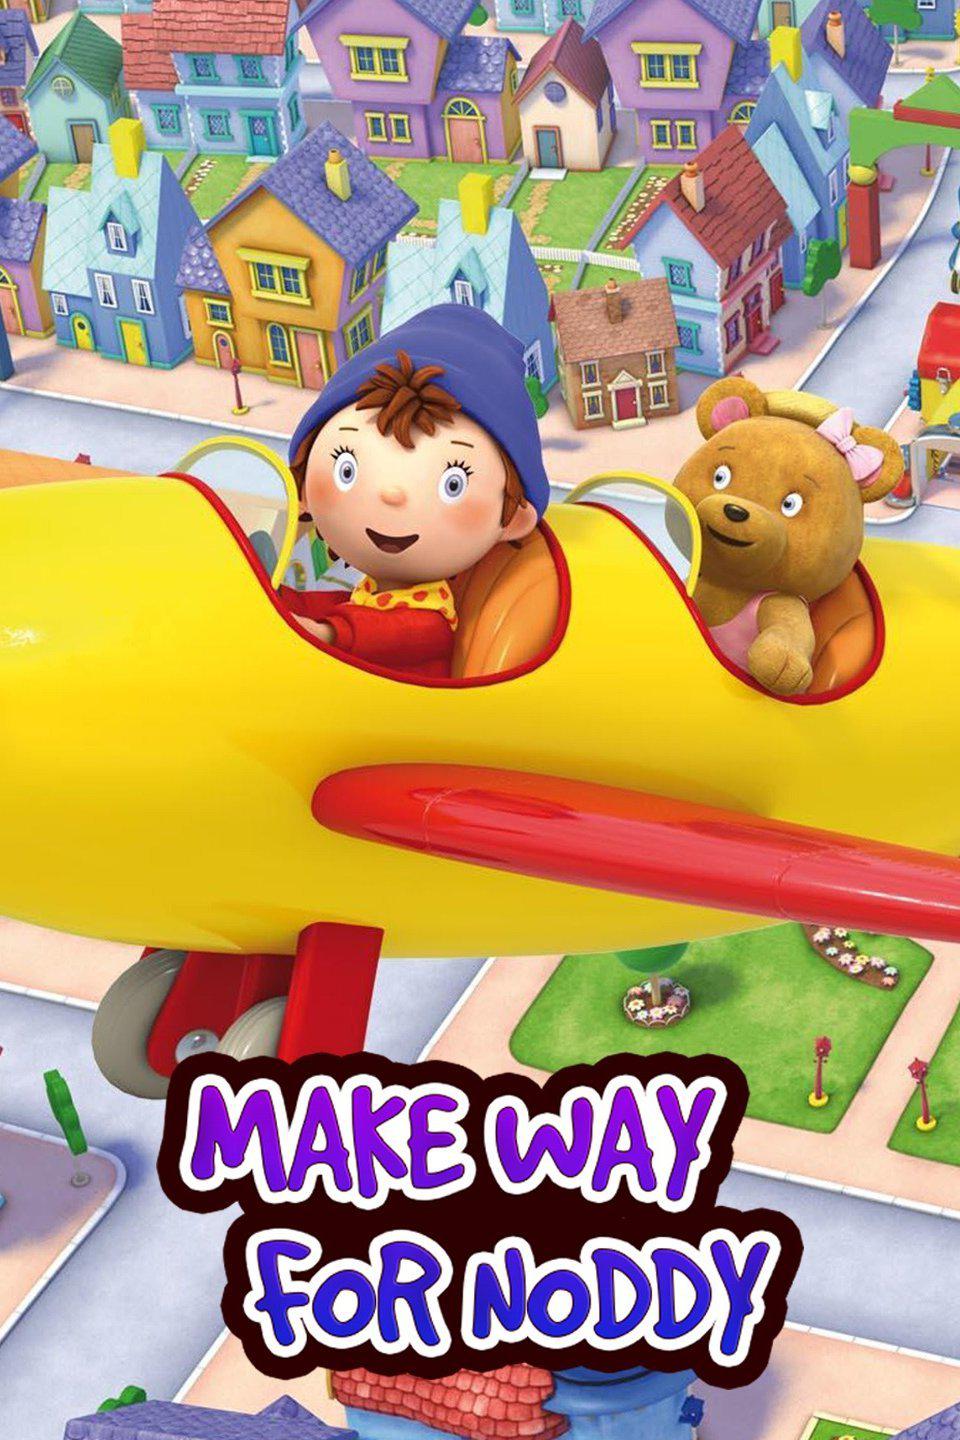 TV ratings for Make Way For Noddy in Norway. PBS Kids TV series